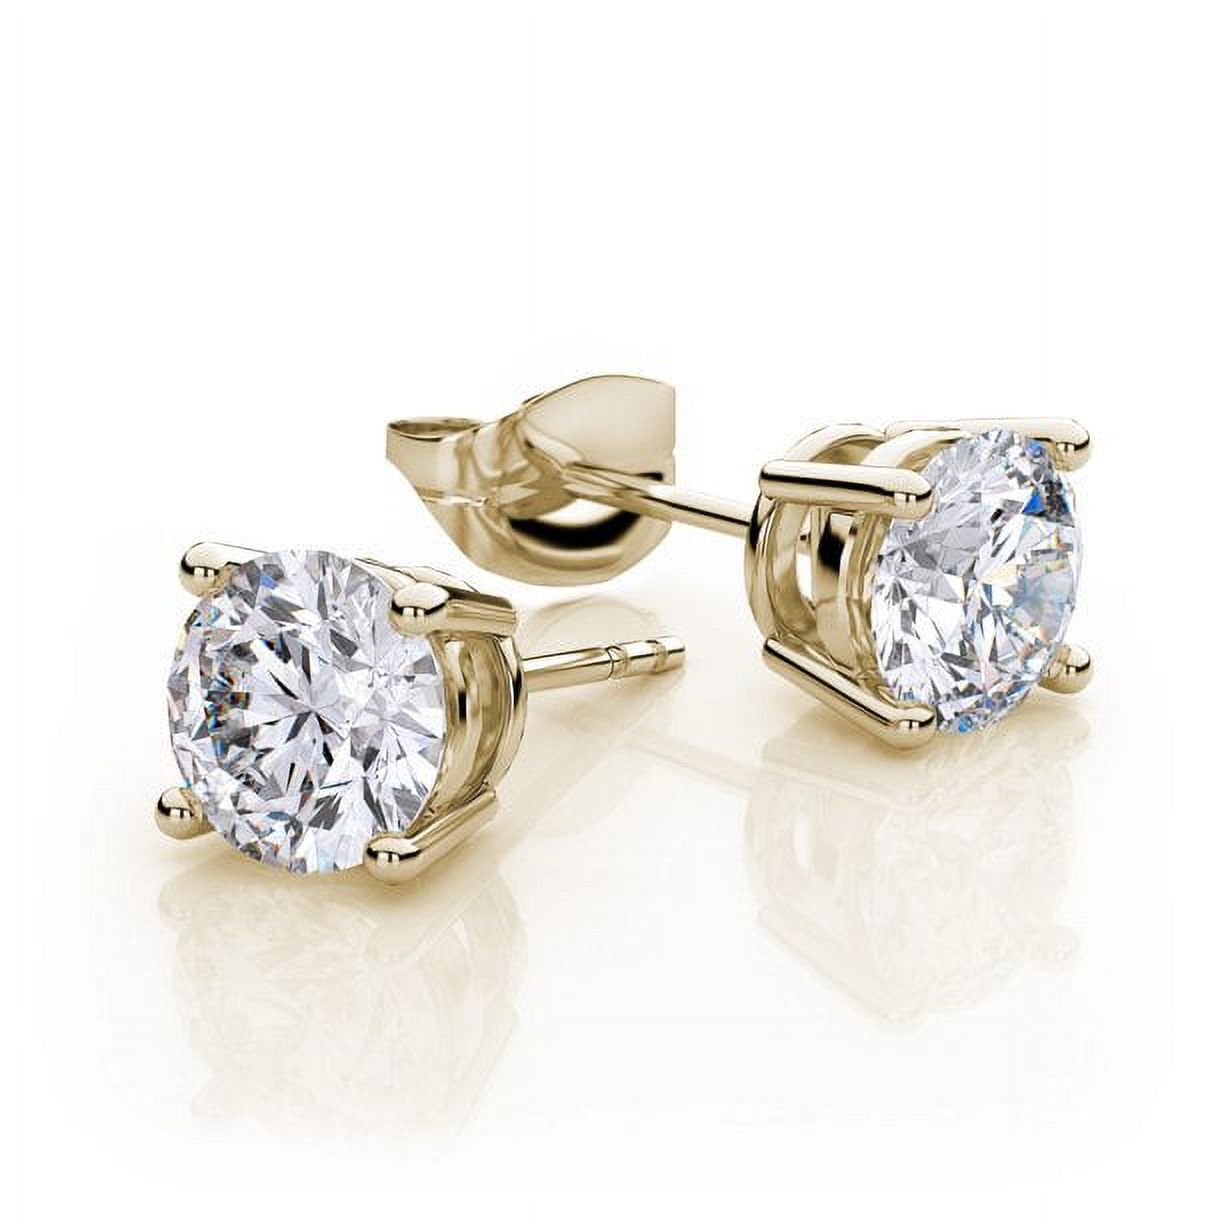 10k Yellow Gold Created White Sapphire 4 Carat Round Stud Earrings Plated - image 1 of 4